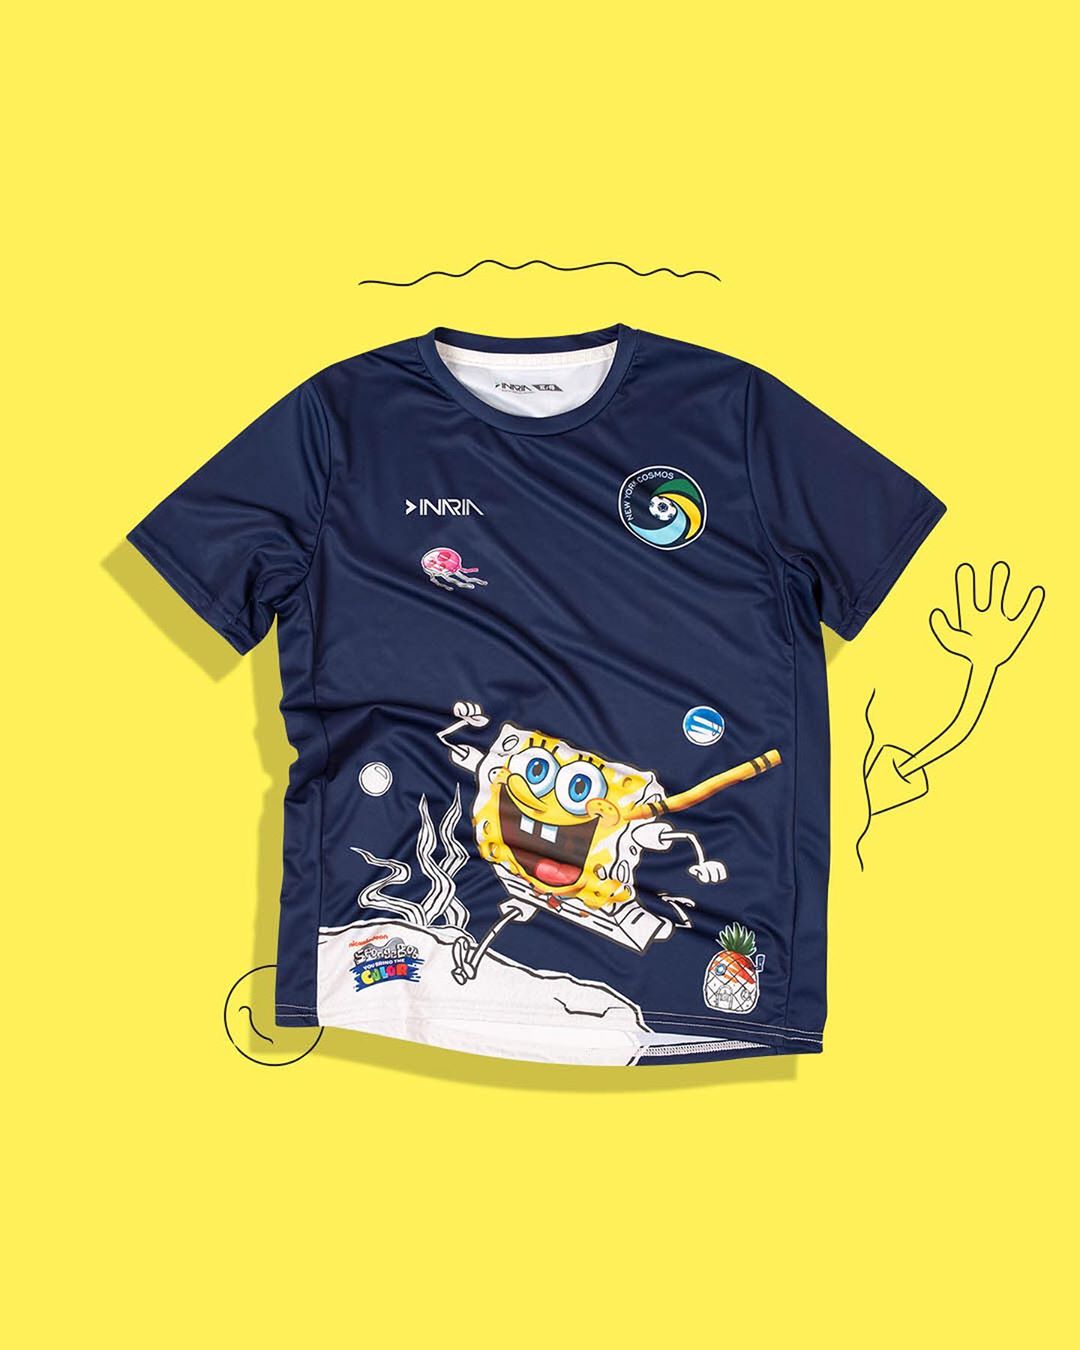 👋🏽👋🏽👋🏽 Win a limited edition @nickelodeon x @nycosmos #Spongebob kit by tagging a pal in the comments.
–
Size AS / Jersey Only / Winner announced on our story 2/16 at 5pm. #inariasoccer